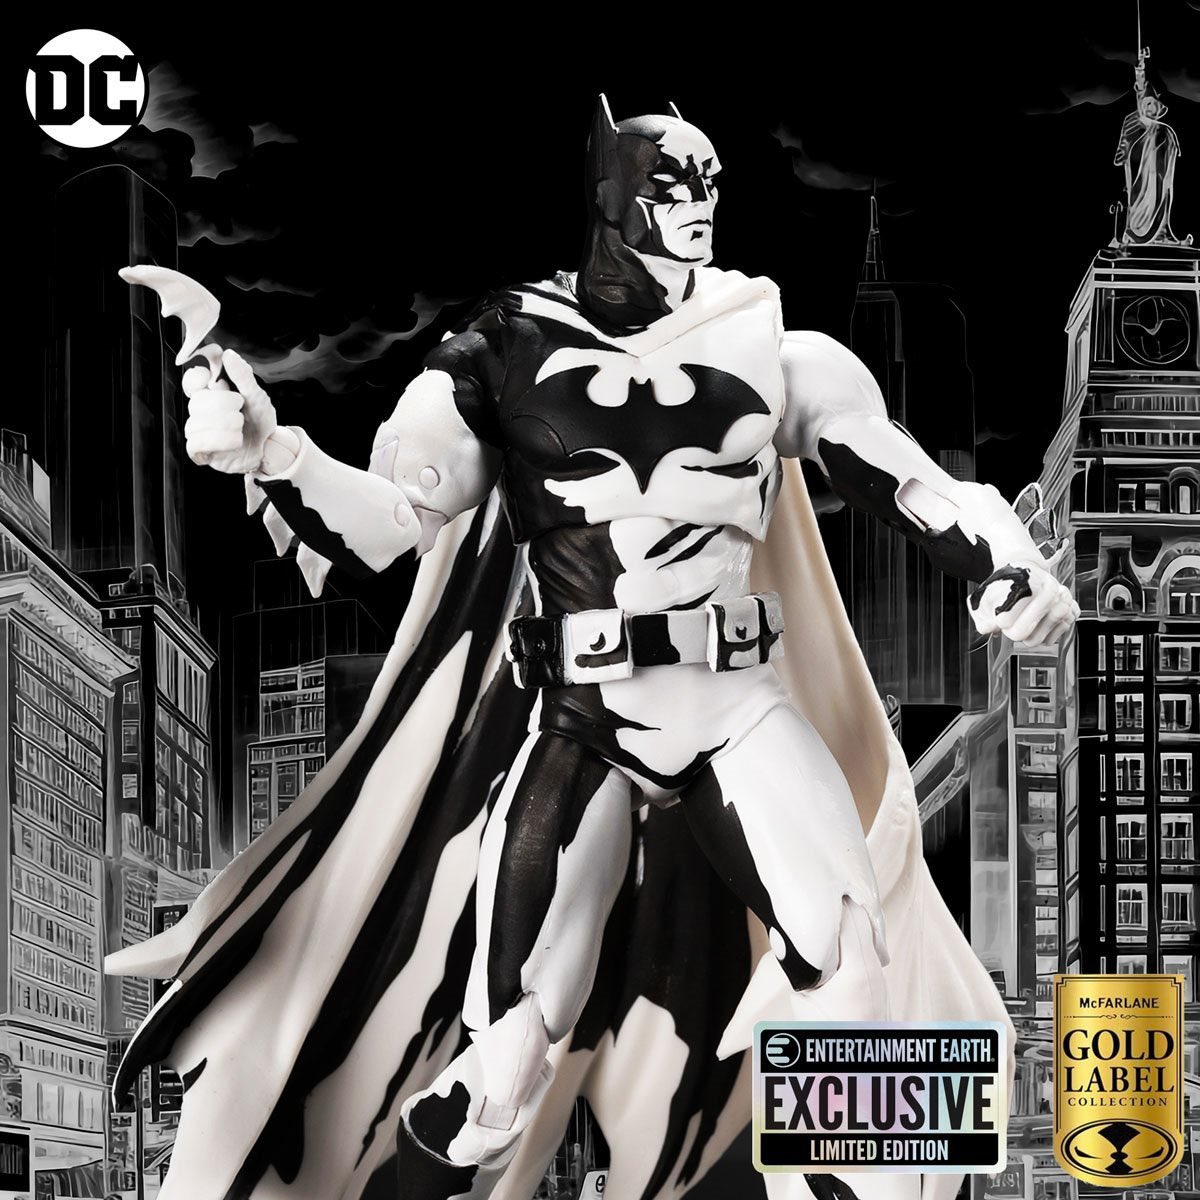 Preorder Now: NEW EE exclusive McFarlane Toys, Batman Hush (Sketch Edition, Gold Label)! entertainmentearth.com/product/mf1719… #ActionFigure #ActionFigures #McFarlaneToys